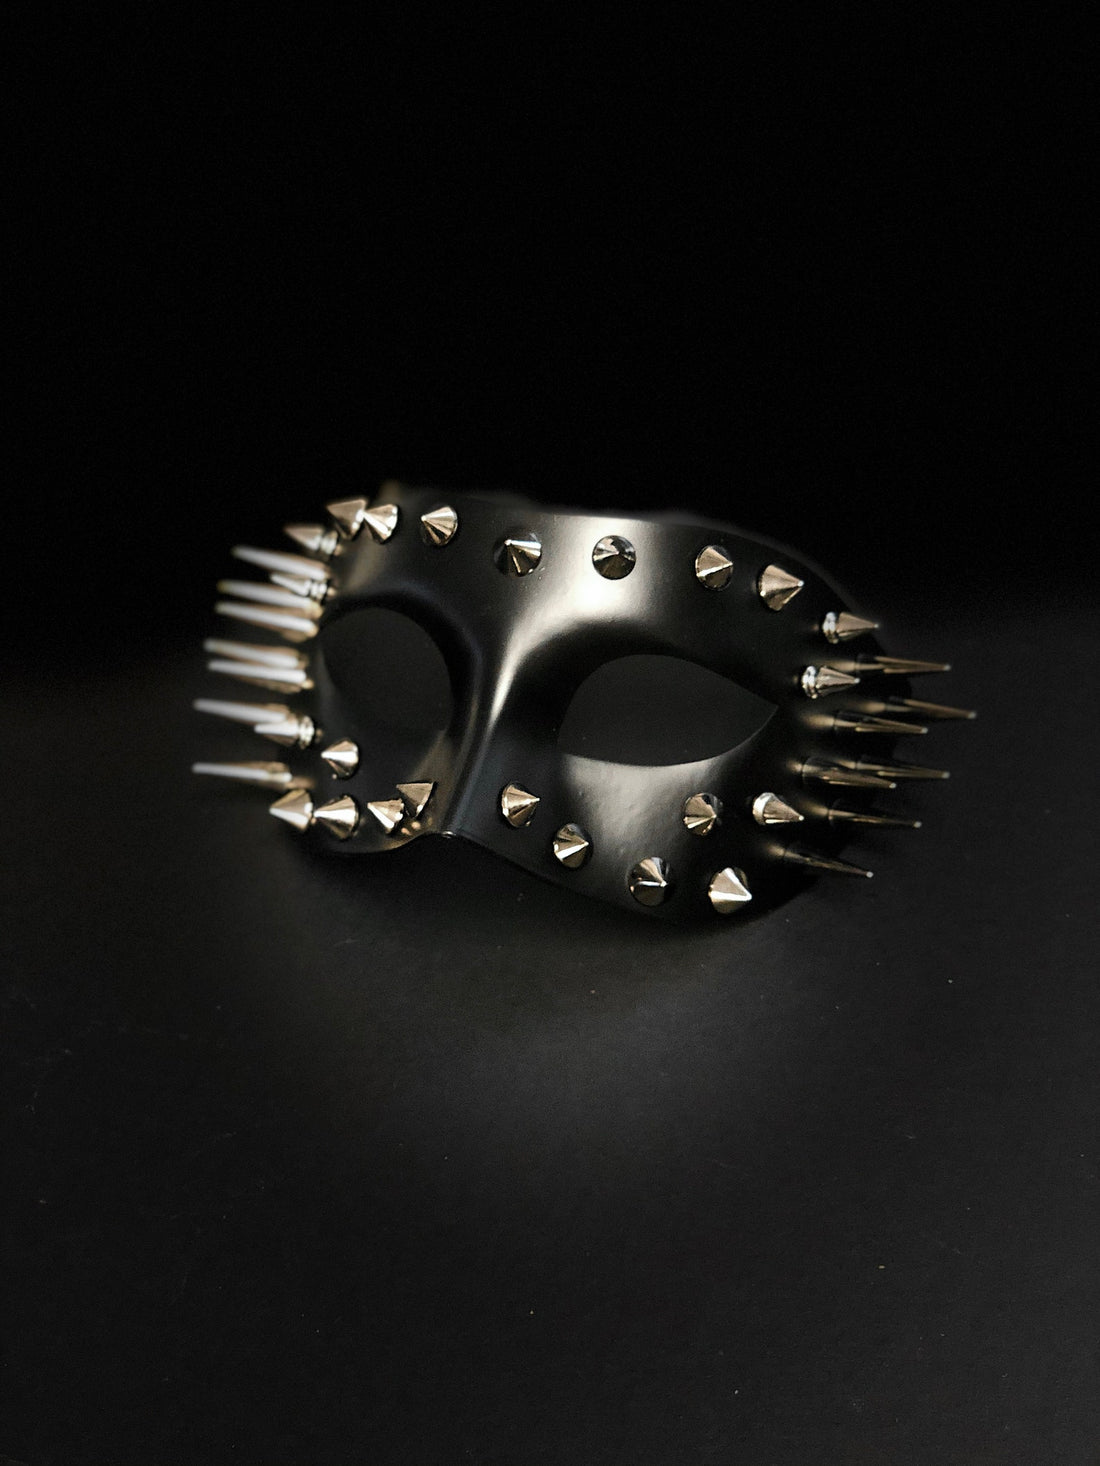 Mens masquerade mask in black with metal silver spikes for sale.